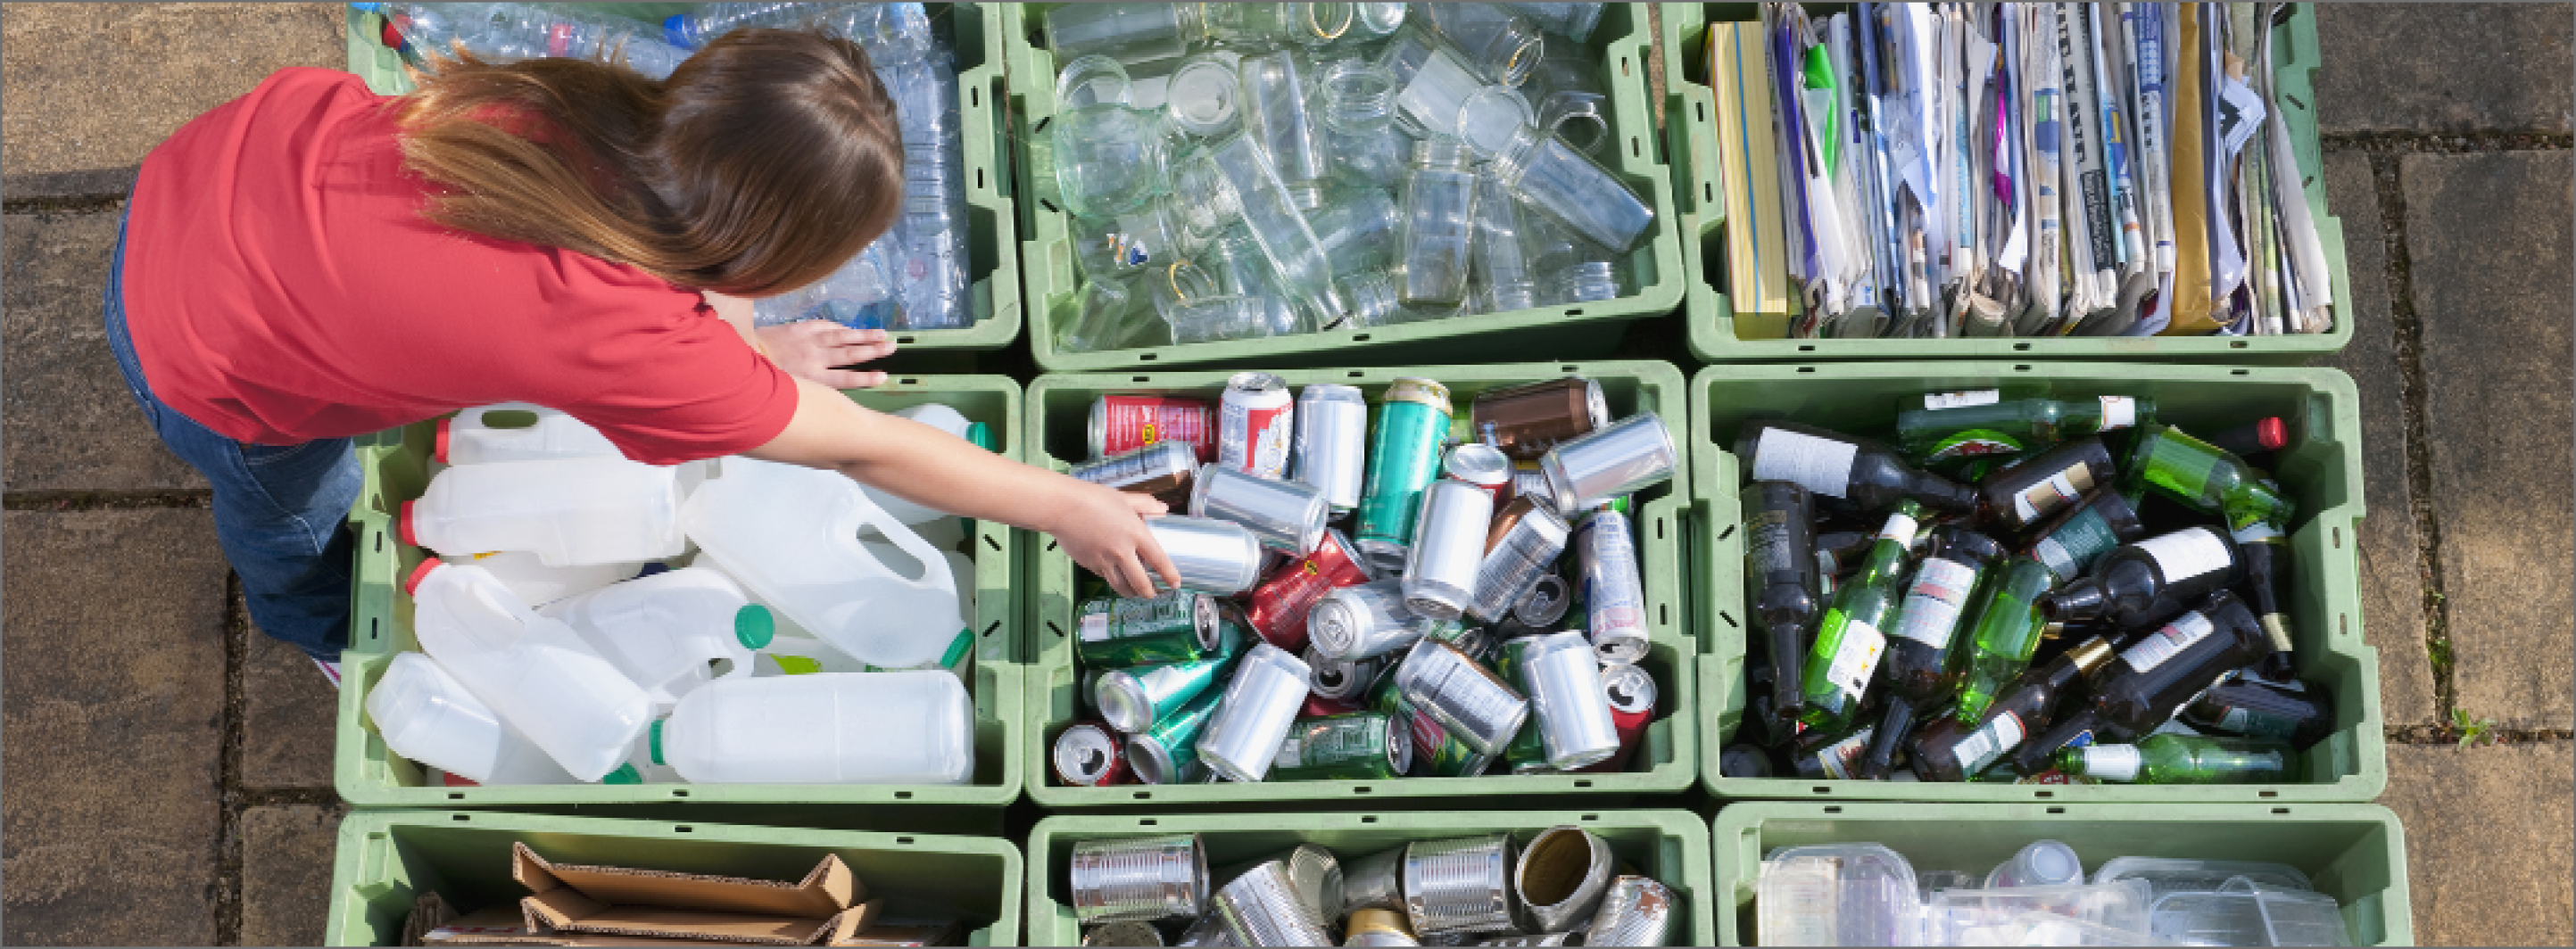 A person sorting recyclable materials into different bins.